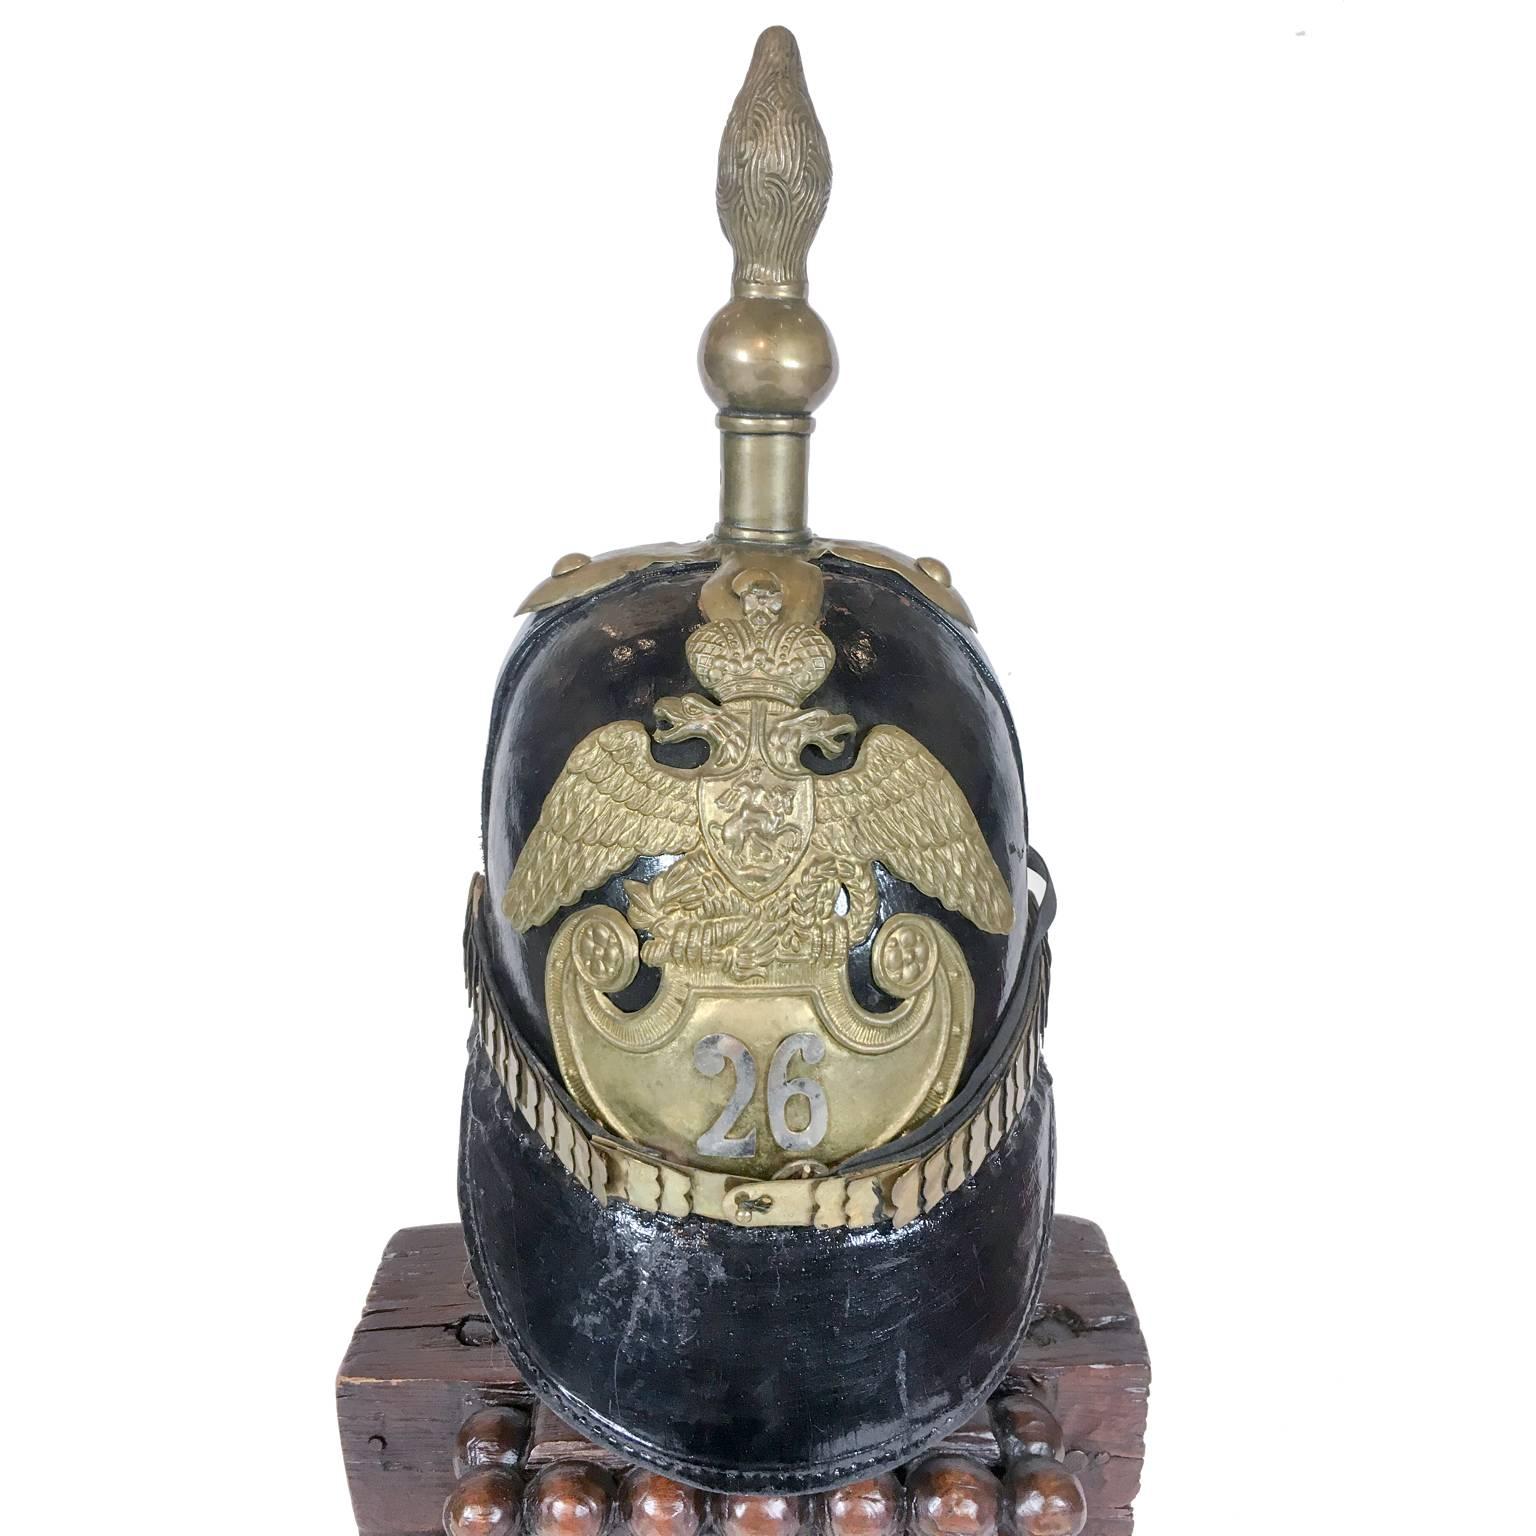 Carved 19th Century Imperial Russian Officer's Pickelhaube Helmet